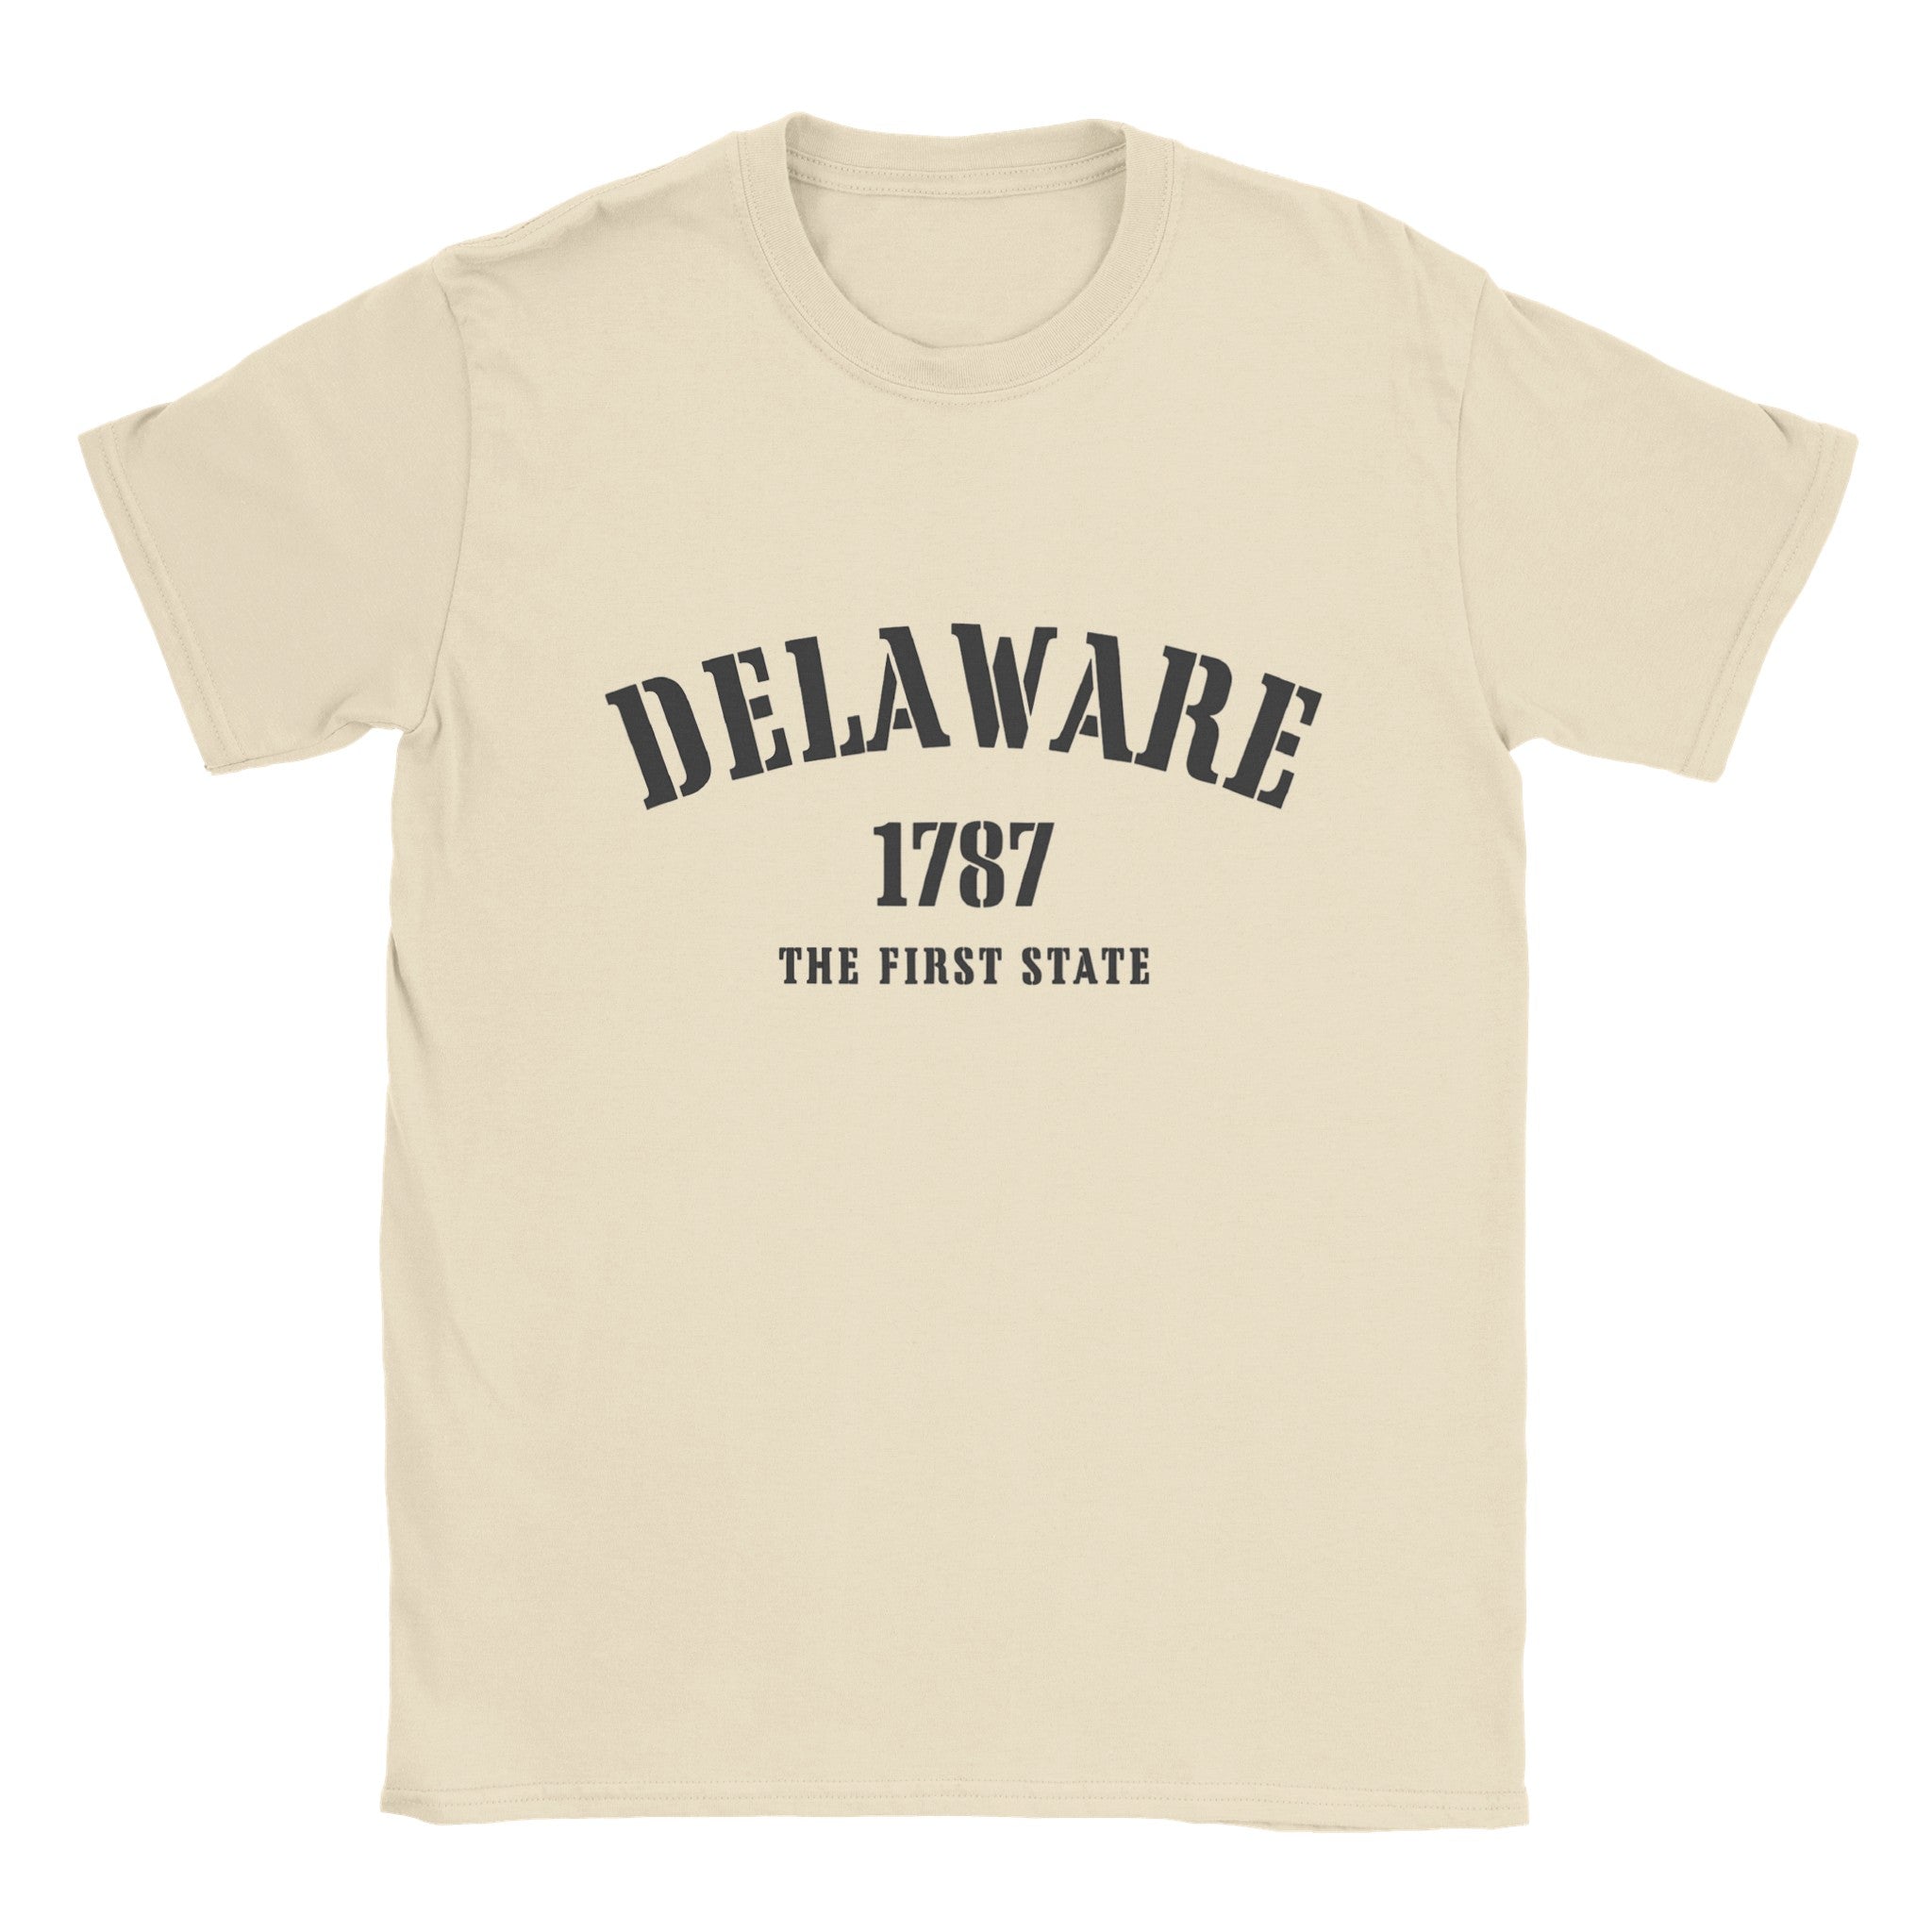 Delaware- Classic Unisex Crewneck States T-shirt - Creations by Chris and Carlos